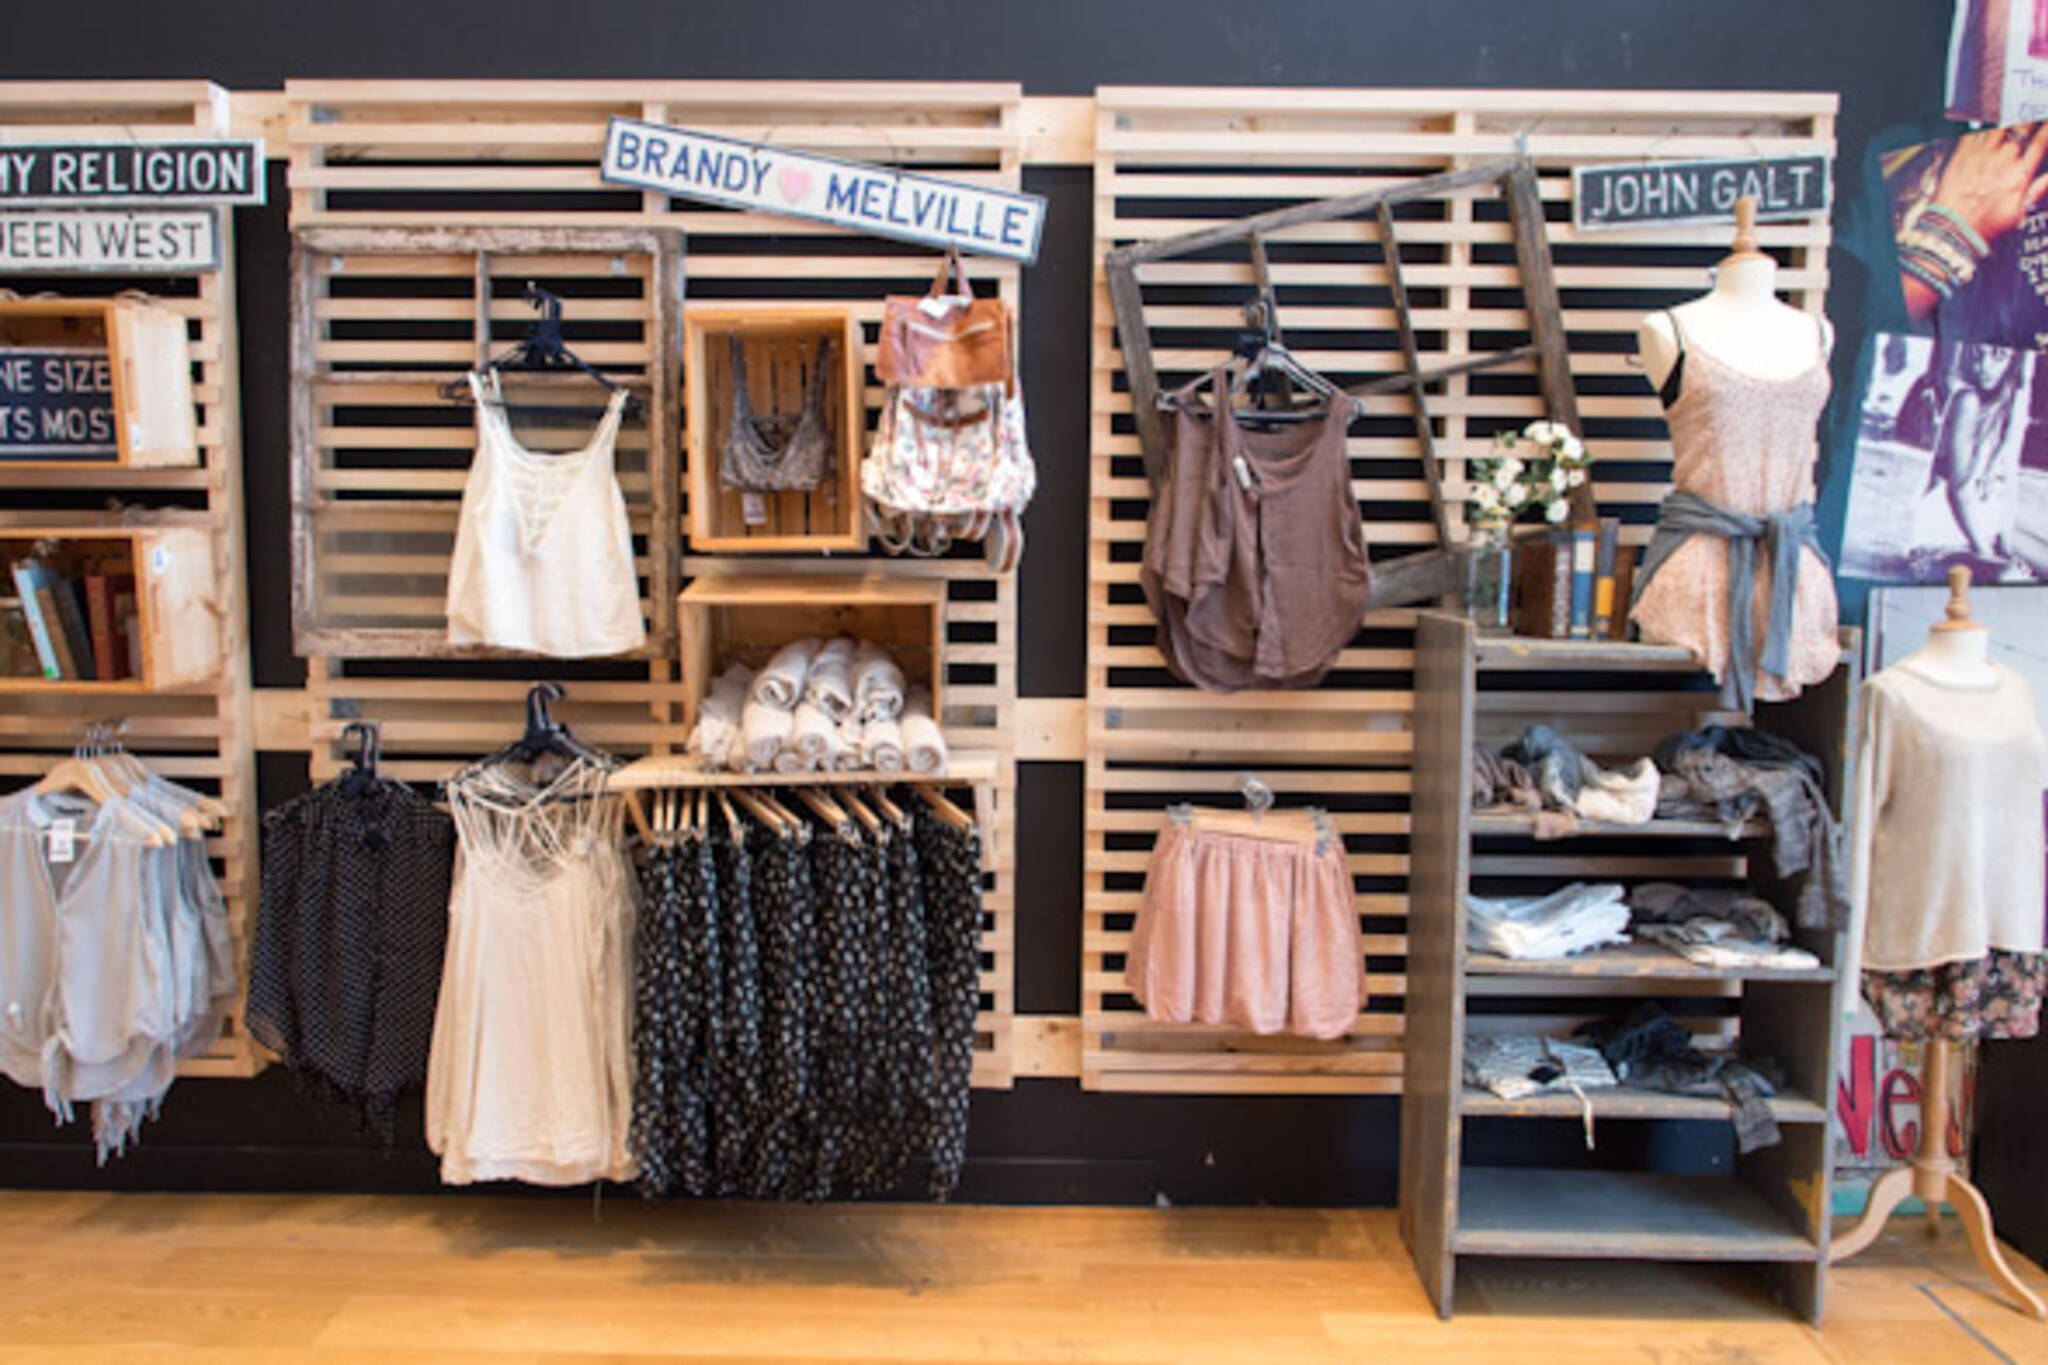 8 Stores Like Brandy Melville That You'll Love